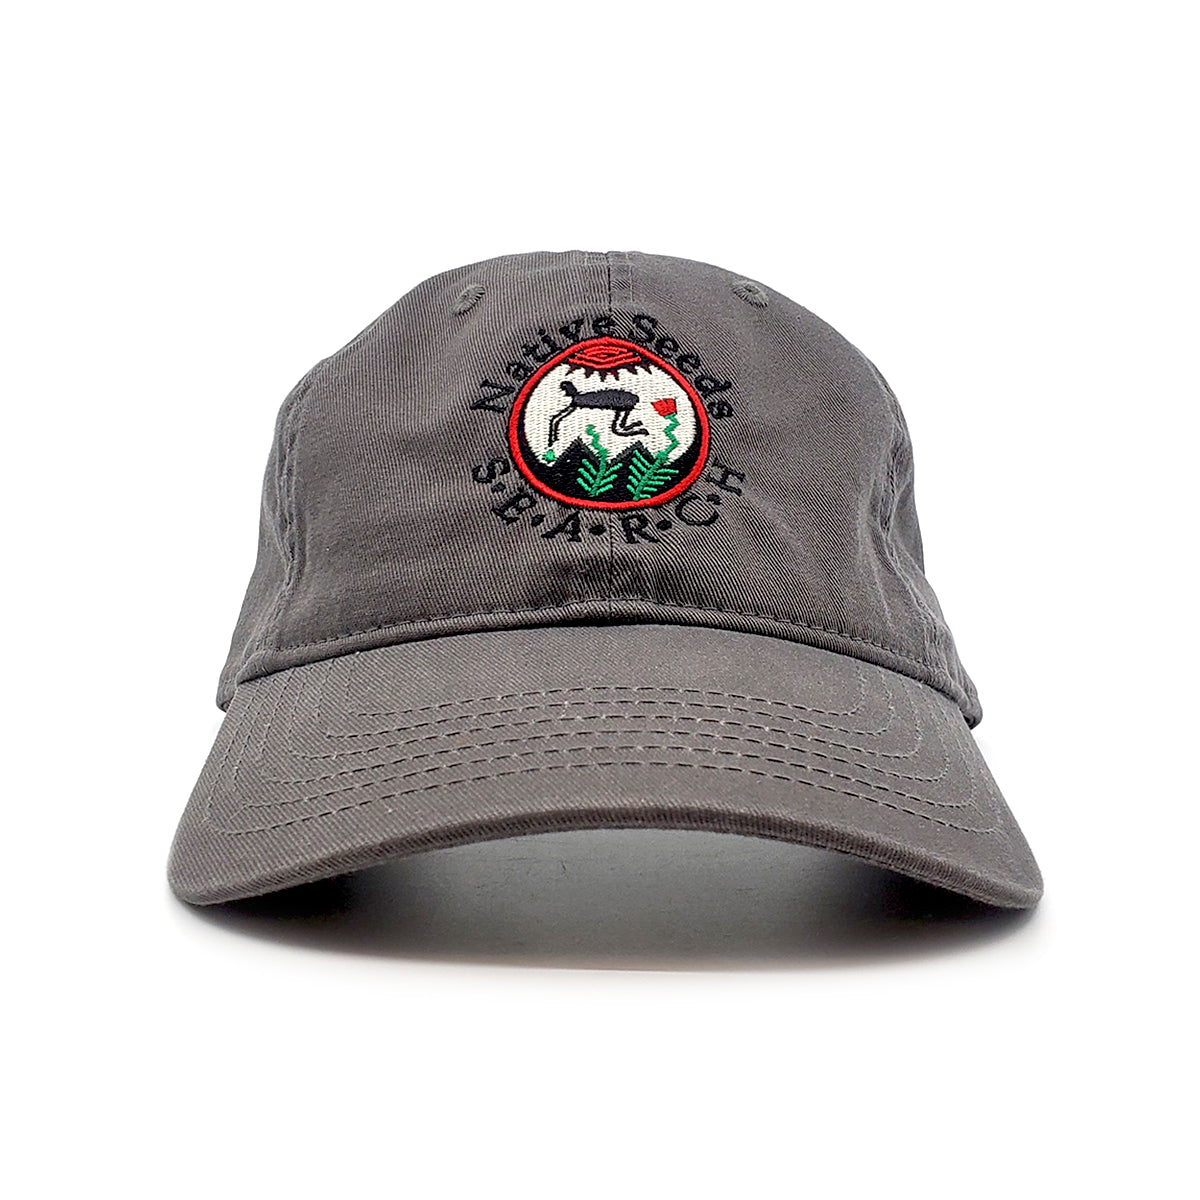 native seeds search logo baseball cap. 100% cotton with embroidered logo